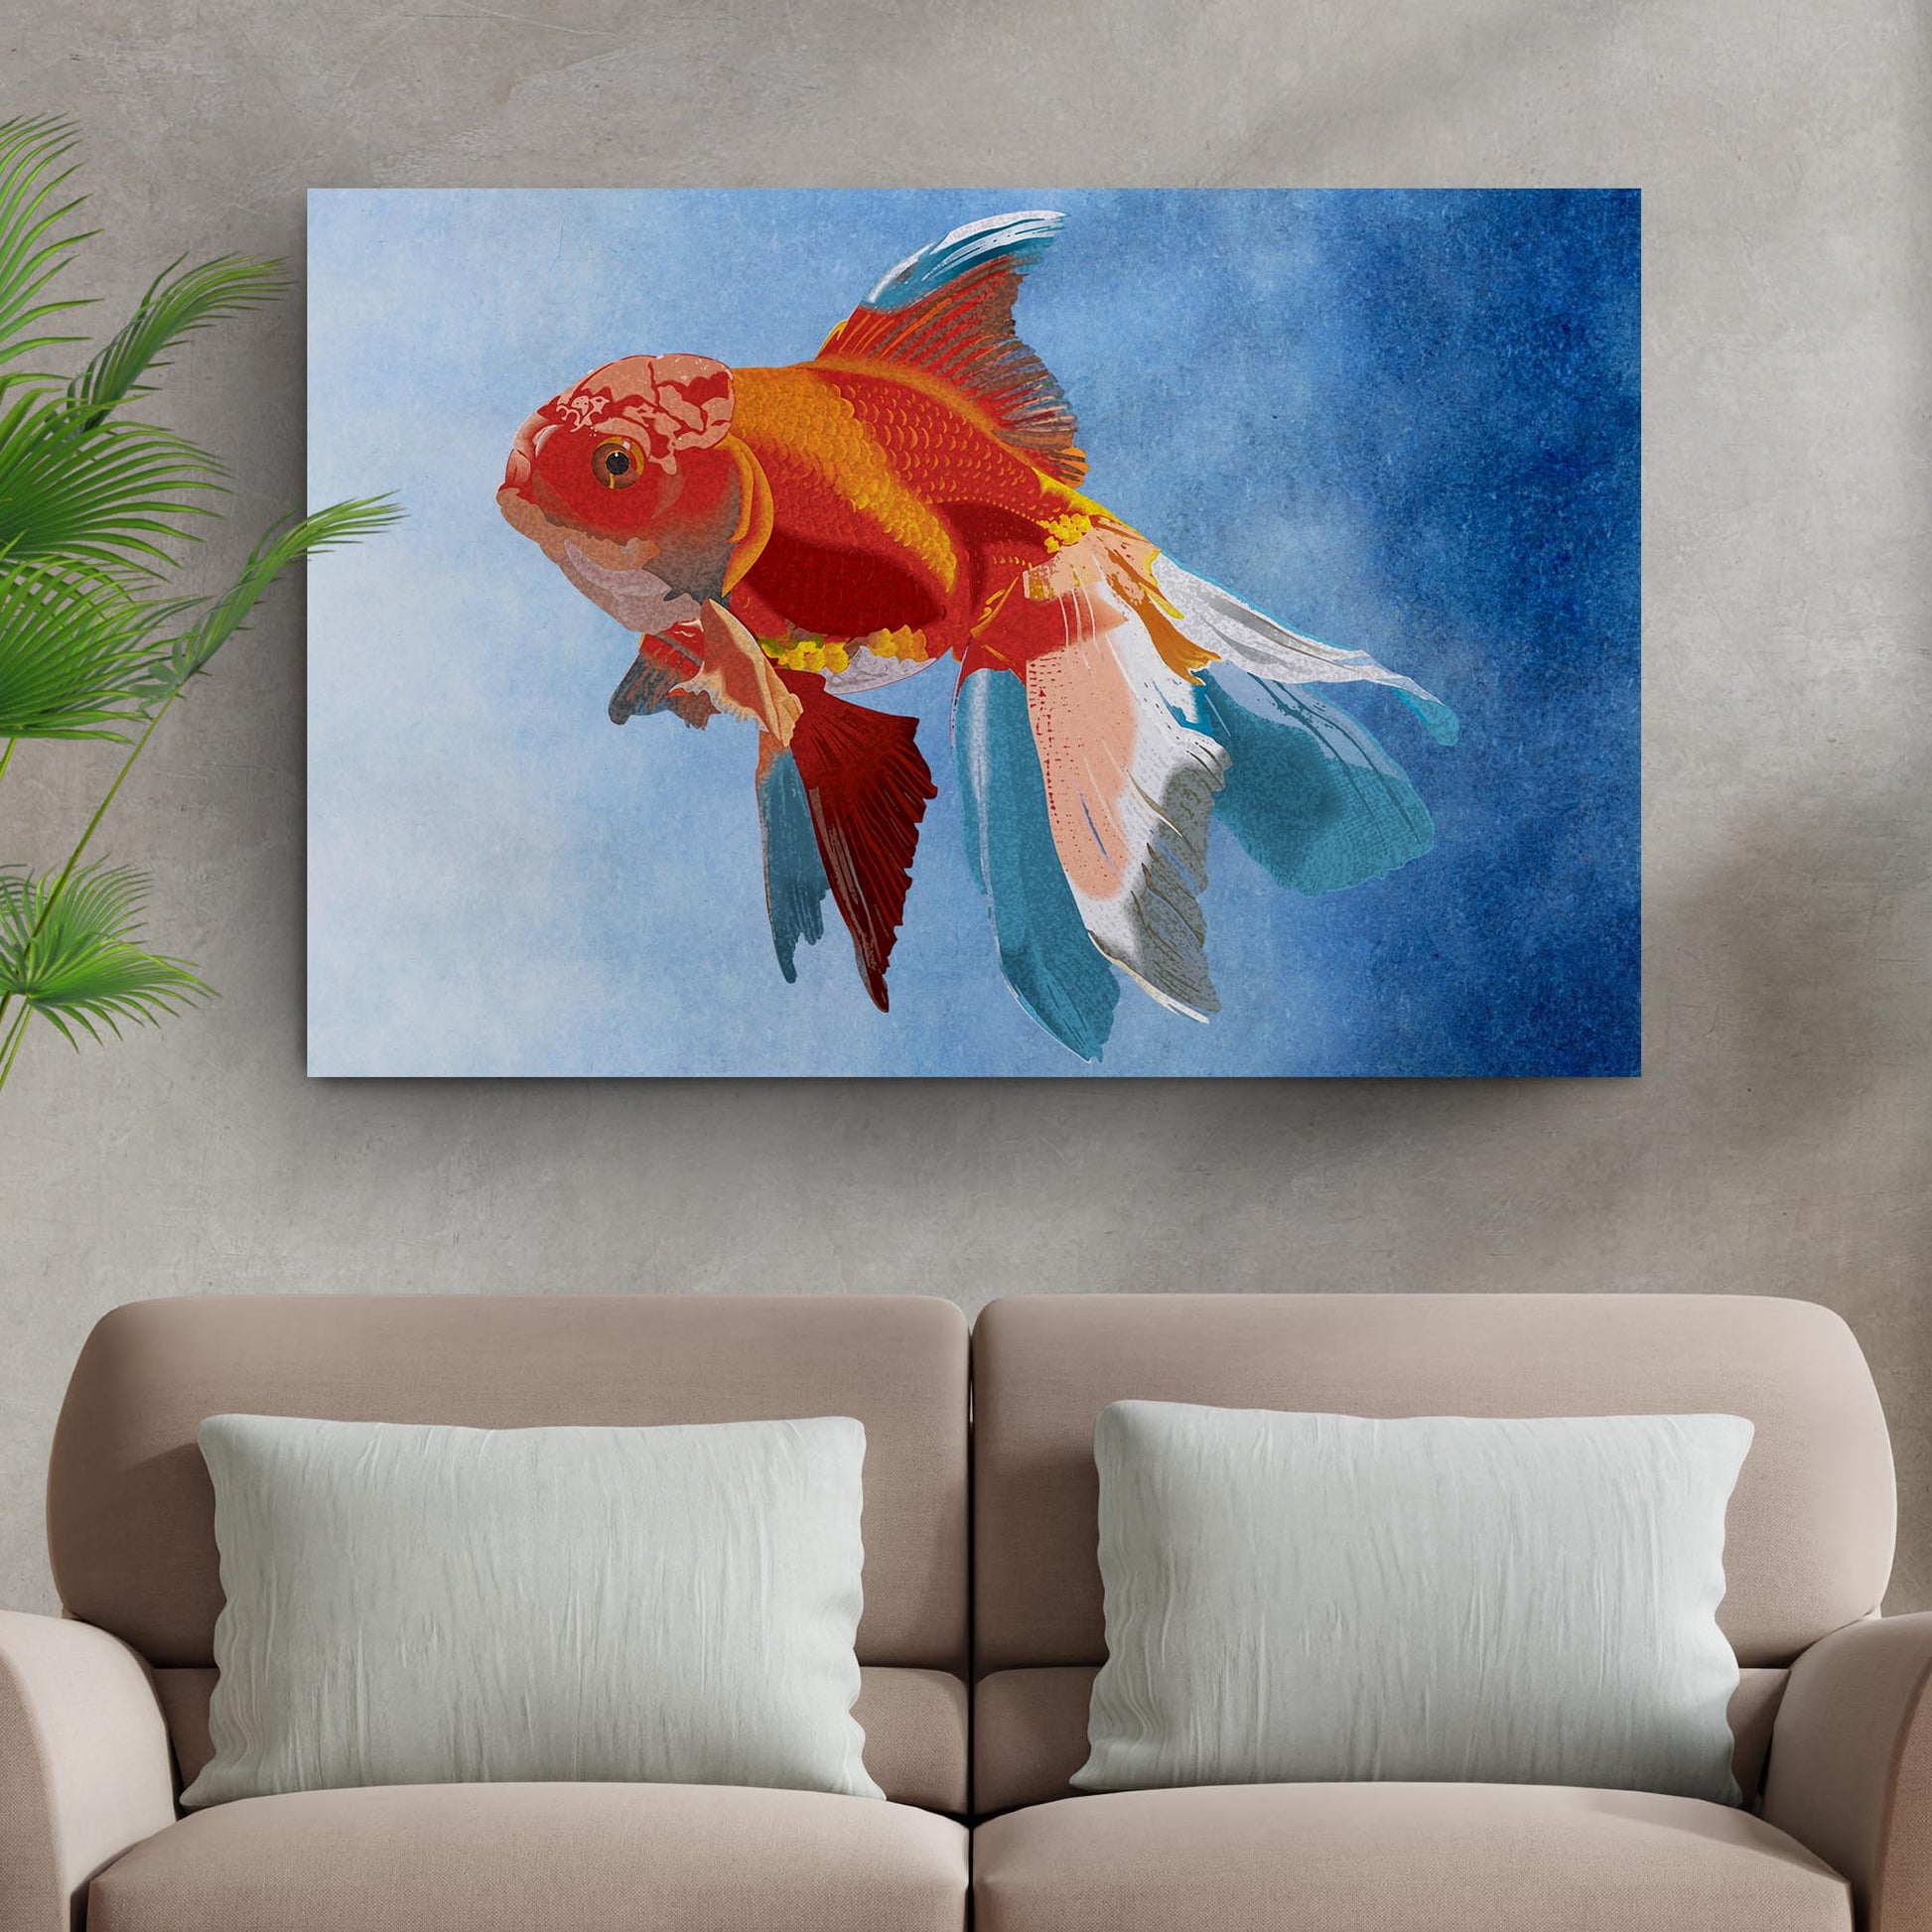 Watercolor Goldfish Canvas Wall Art - Image by Tailored Canvases